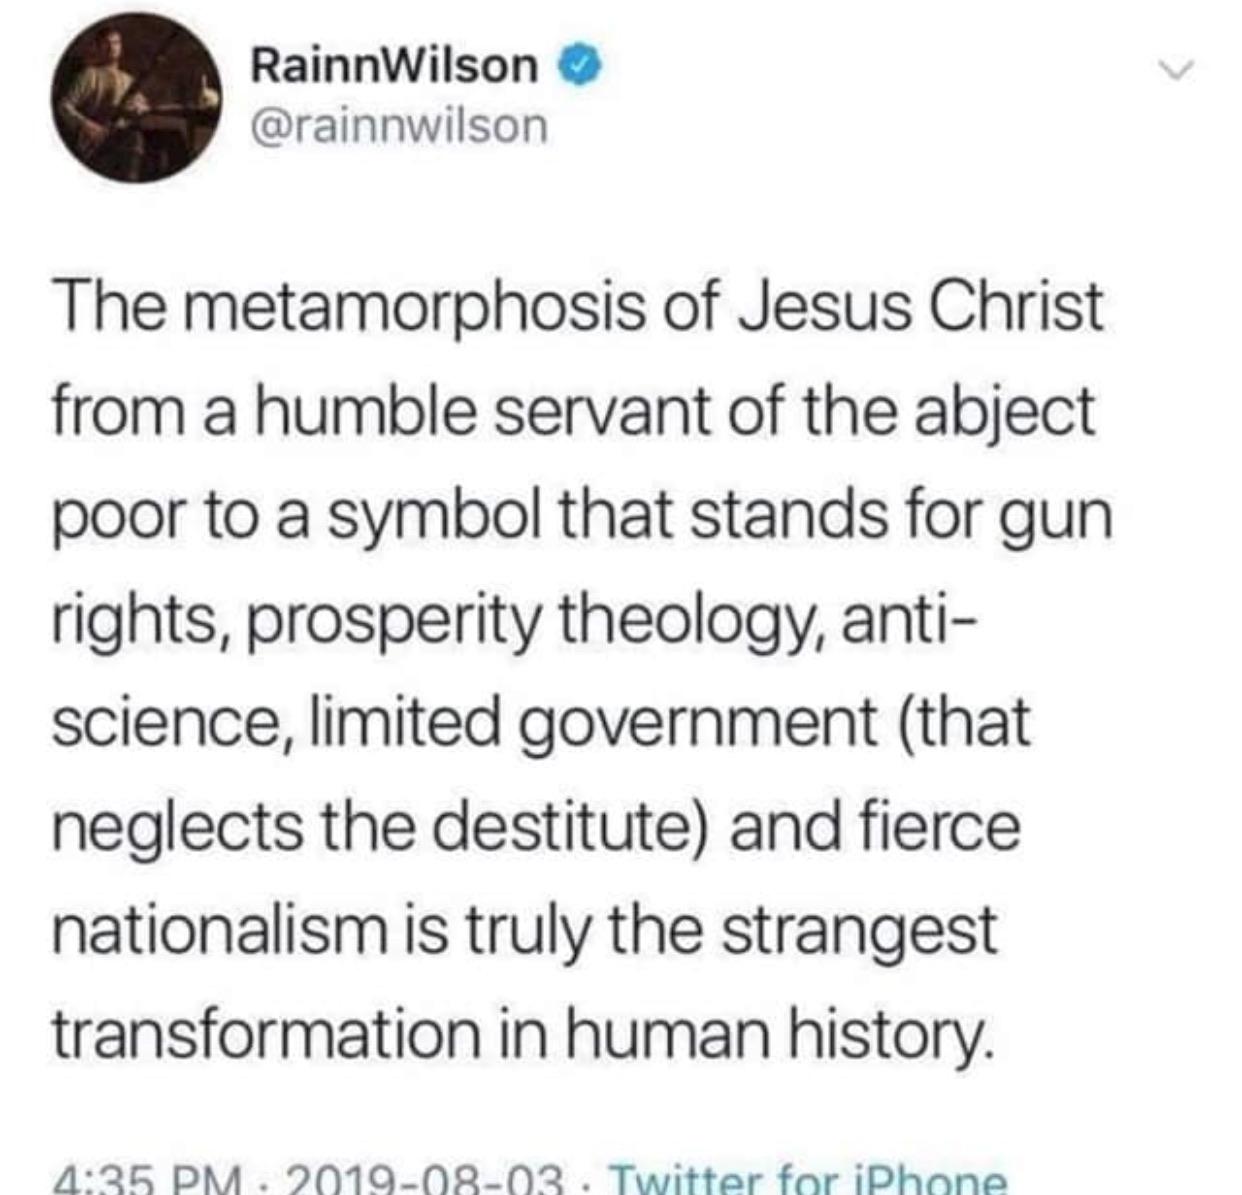 christian christian-memes christian text: RainnWilson @rainnwilson The metamorphosis of Jesus Christ from a humble servant of the abject poor to a symbol that stands for gun rights, prosperity theology, anti- science, limited government (that neglects the destitute) and fierce nationalism is truly the strangest transformation in human history. 